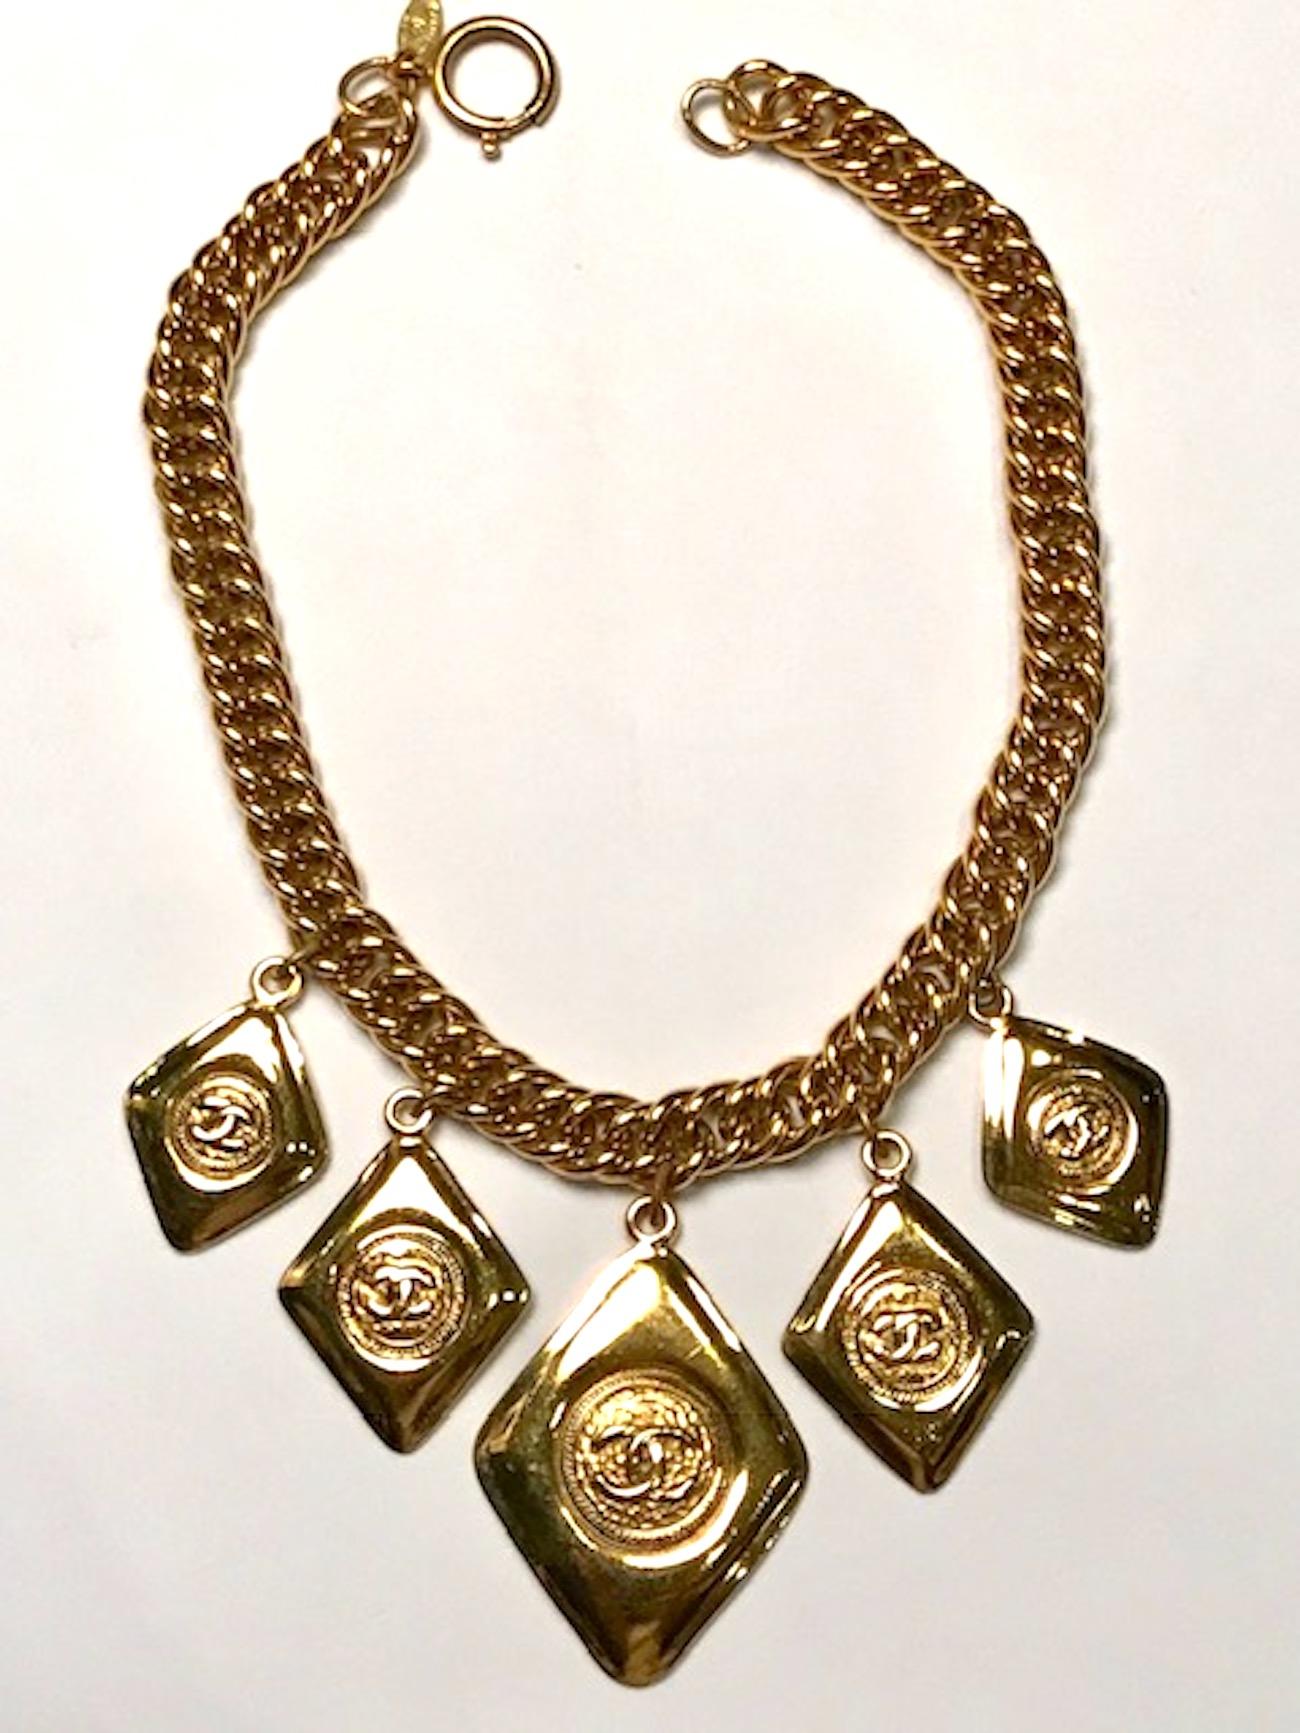 Circa 1980 to 1985 is this statement Chanel necklace with five five diamond pendant  charms. Each charm has the Chanel double CC logo in a round stamp on diamond pendant. The smallest charm is 1 1/8